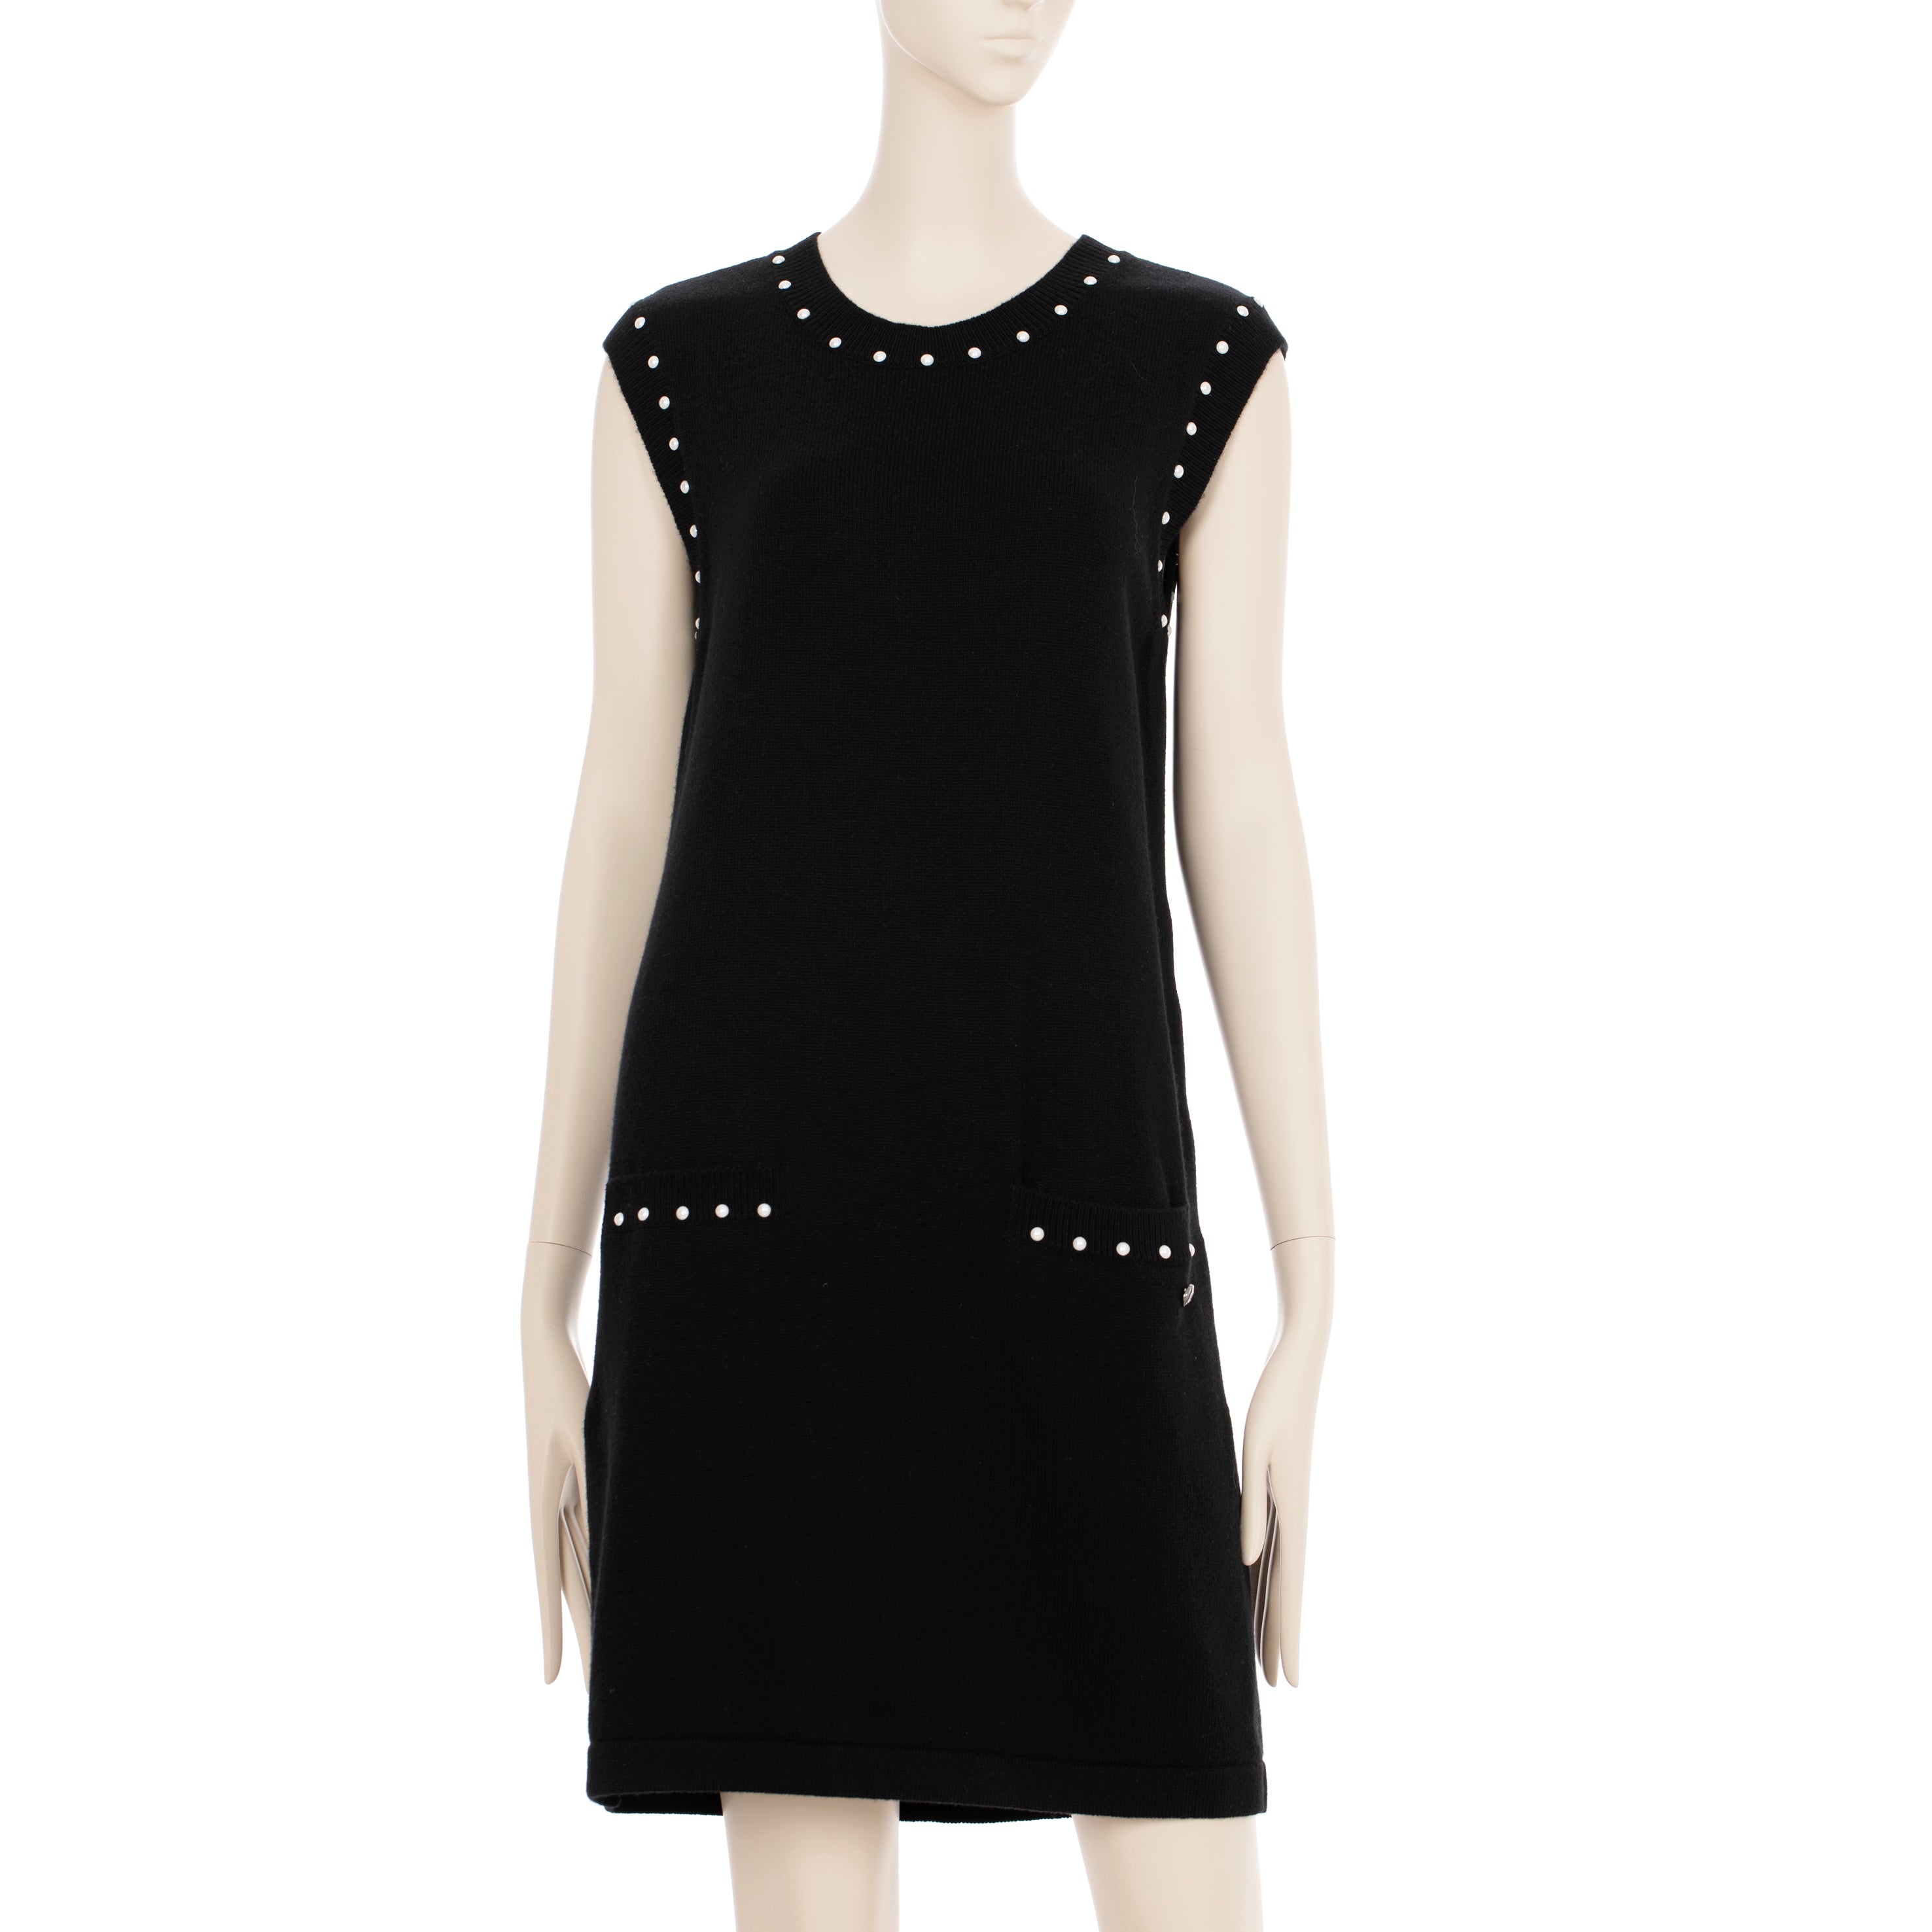 Chanel Black Knit Dress With Faux Pearl Details 40 FR